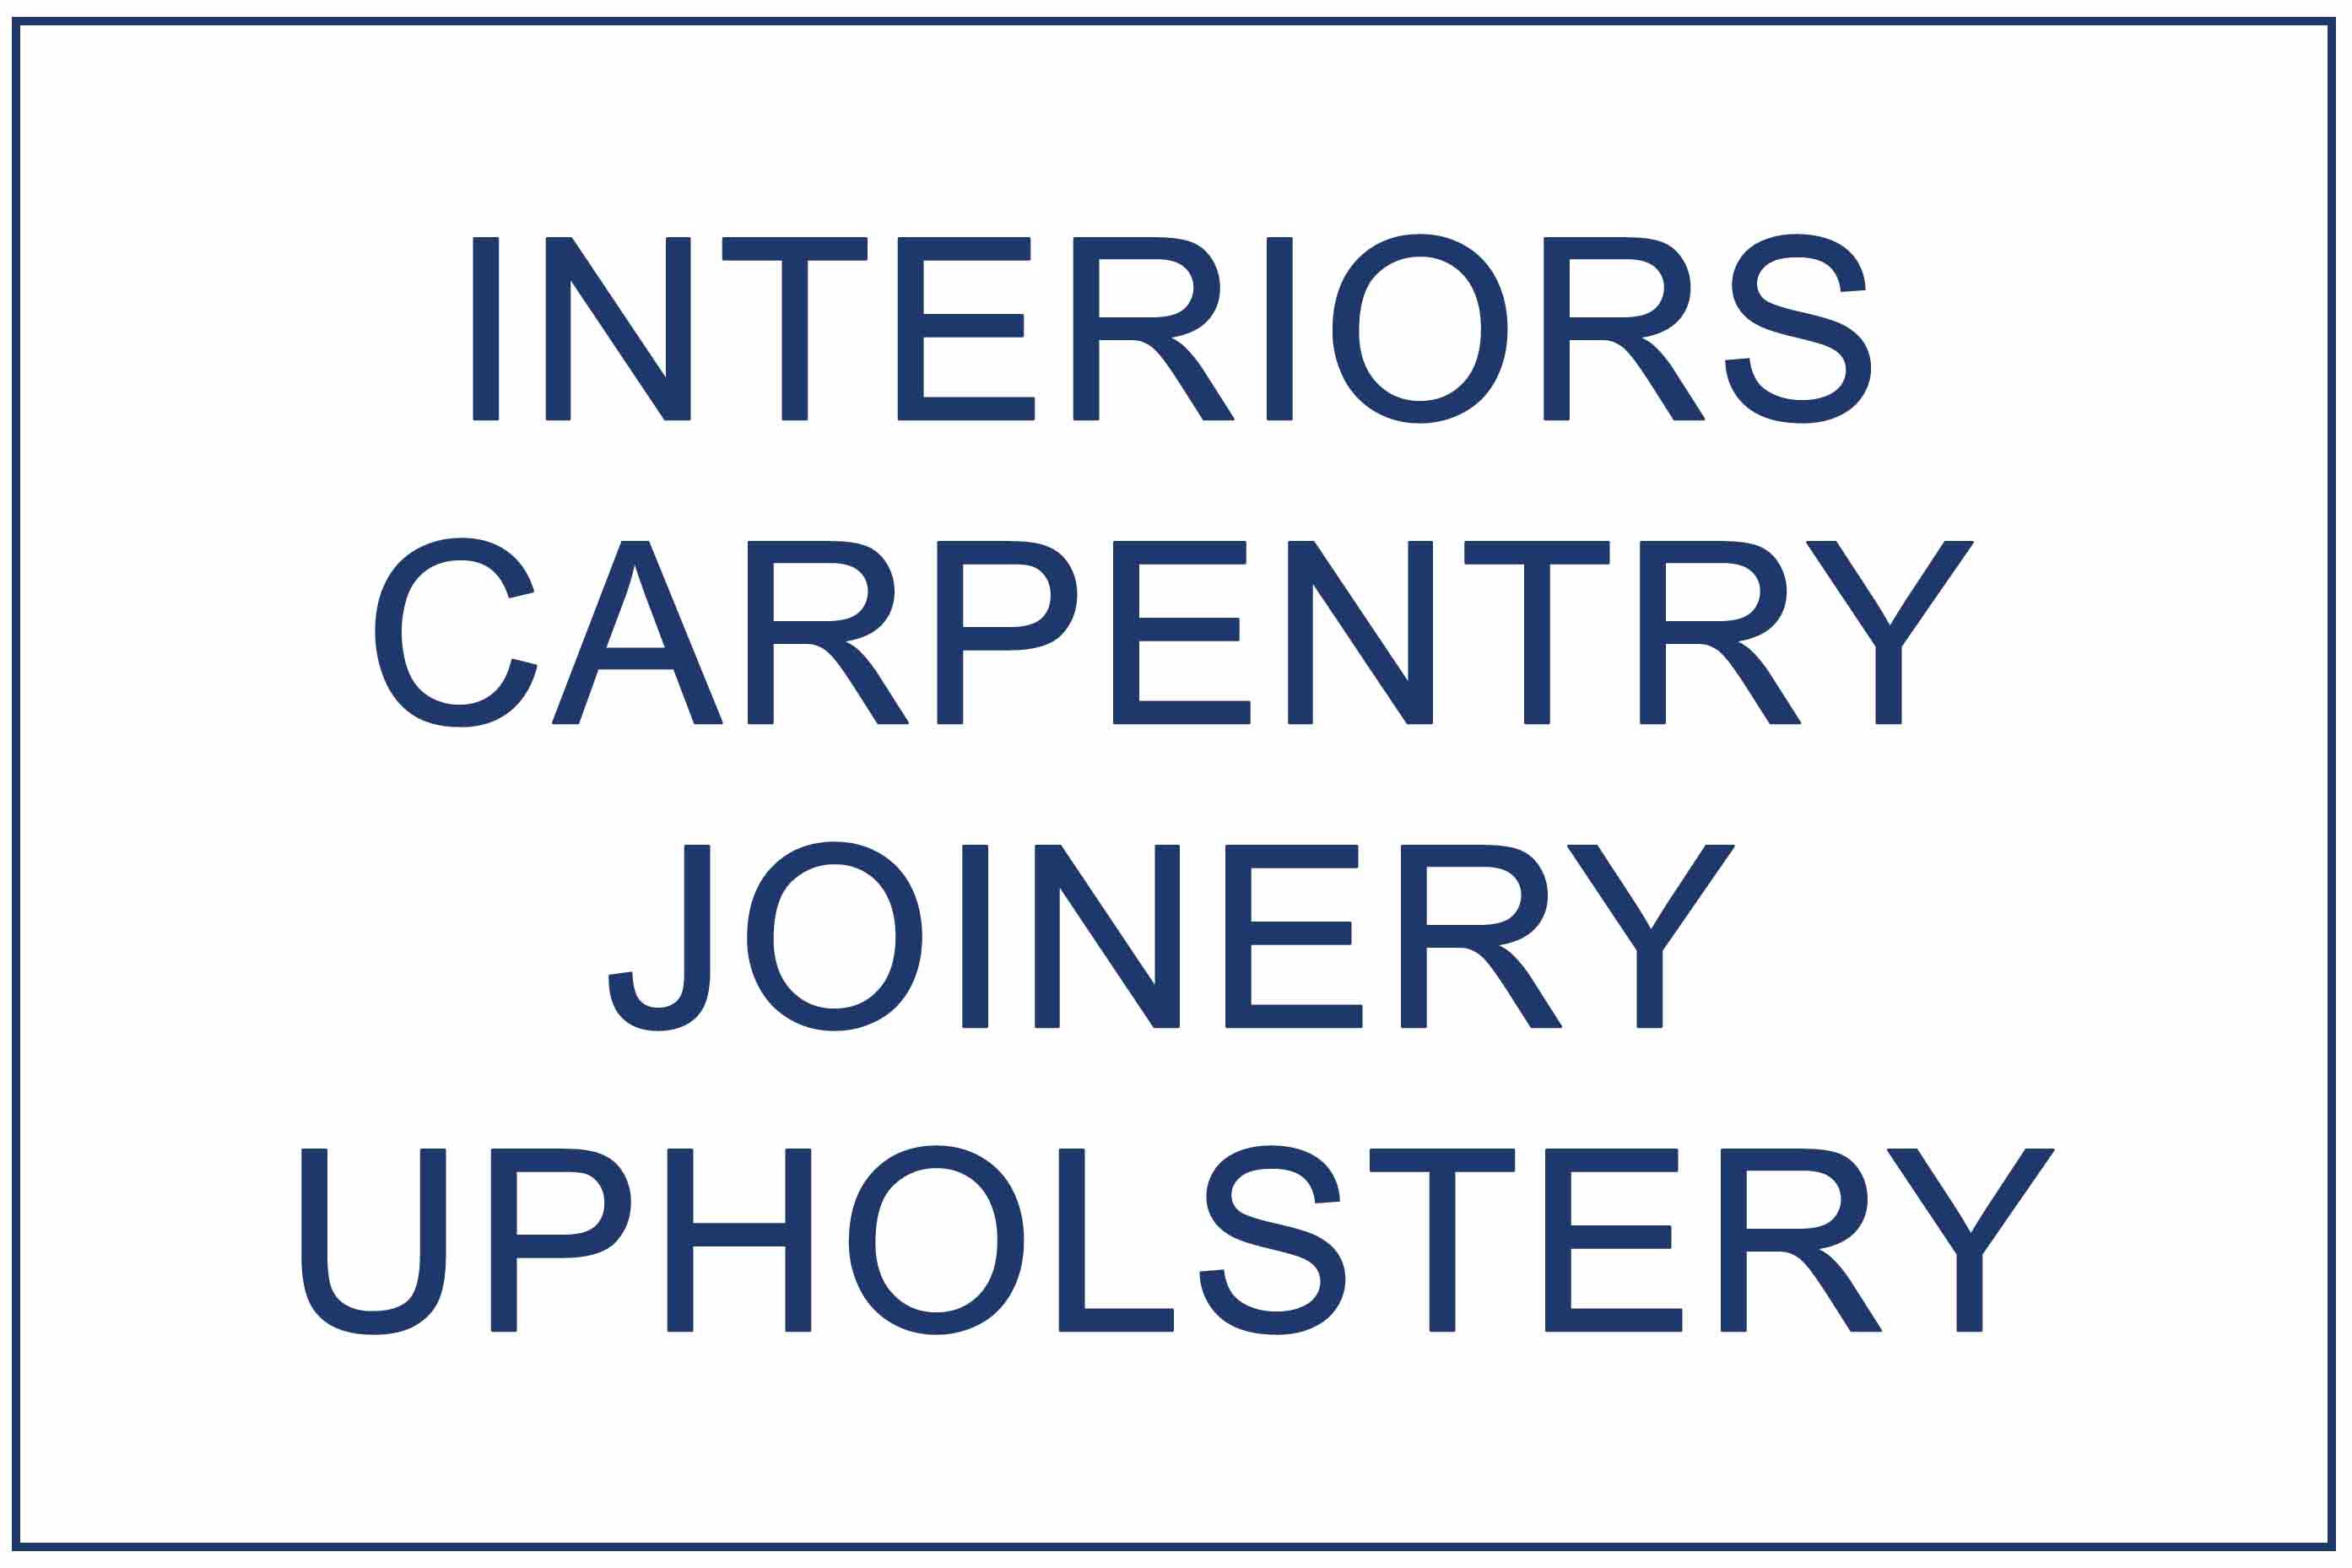 Interiors , Carpentry, Joinery & Upholstery